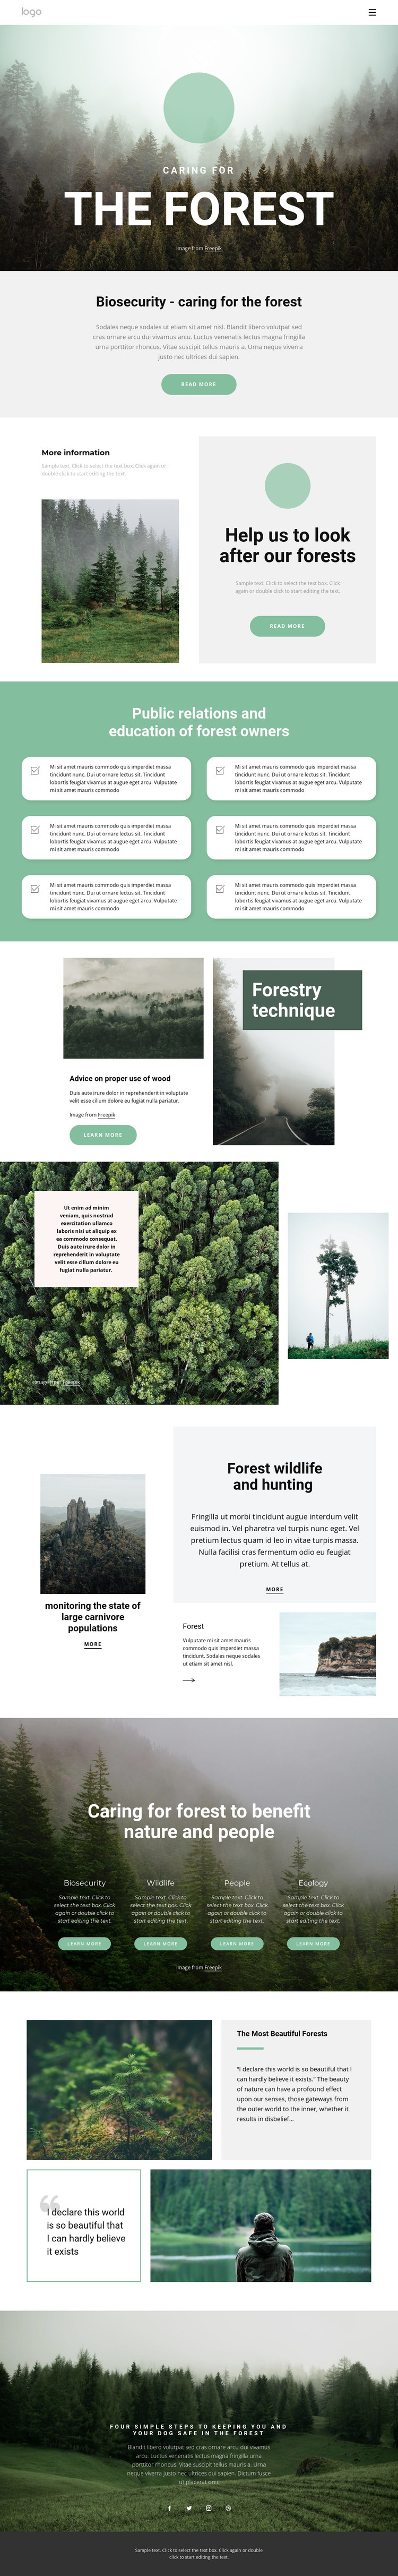 Caring for parks and forests HTML Template